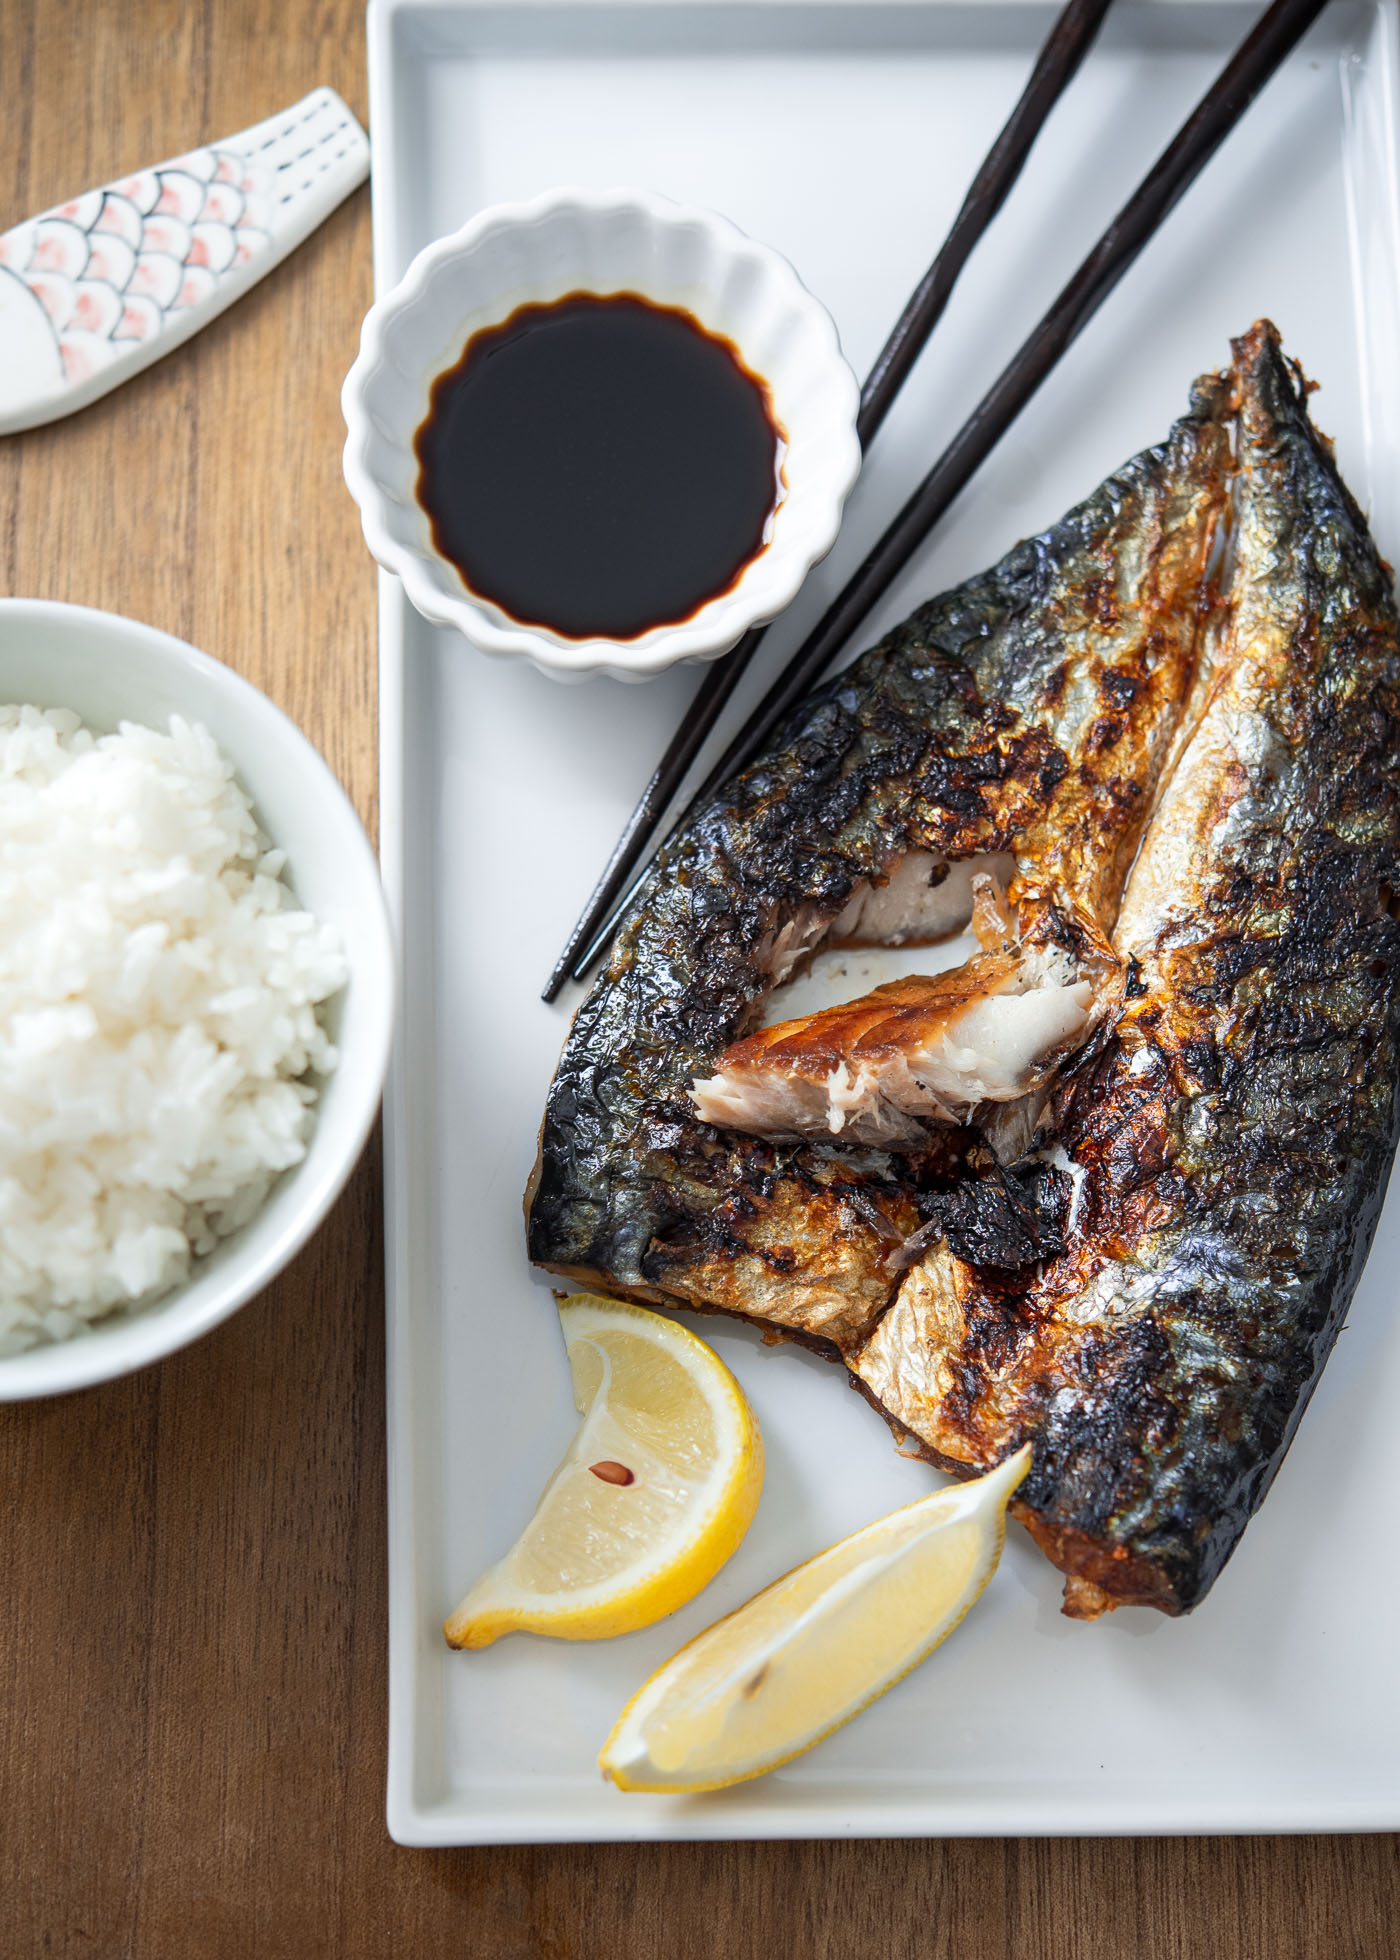 Grilled mackerel fish served with soy sauce and lemon wedges.